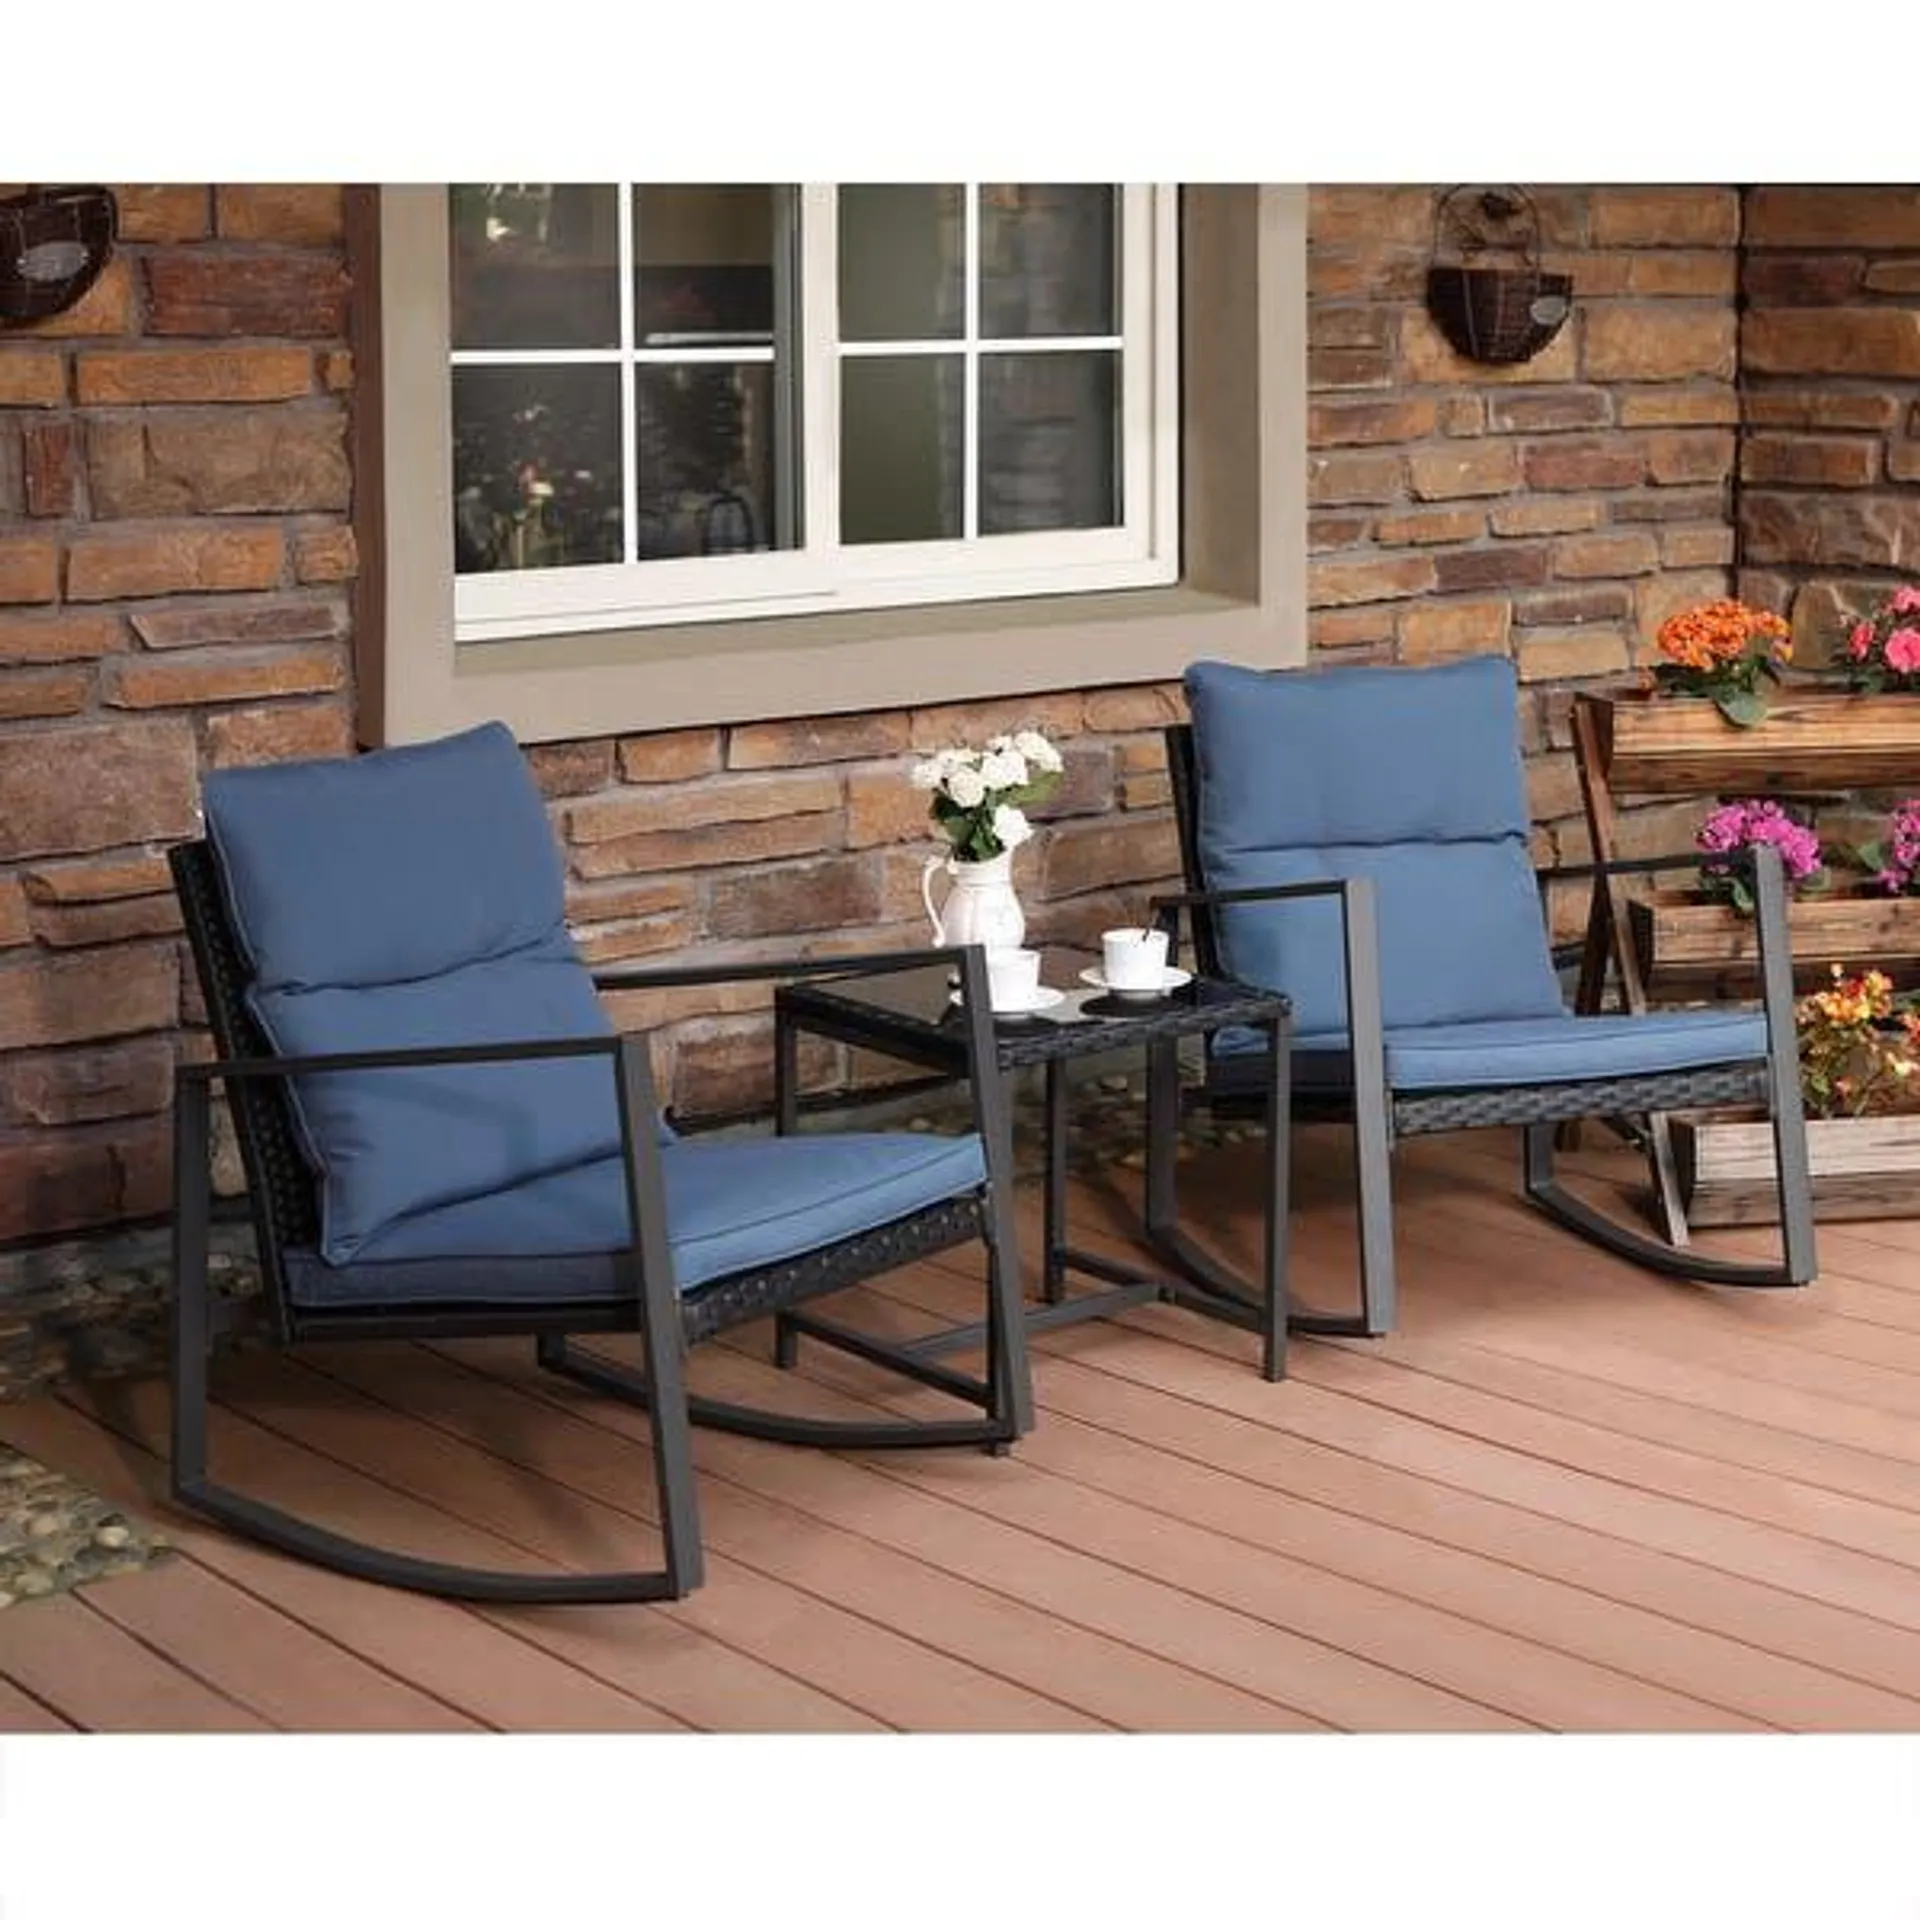 COSIEST Outdoor Bistro Rocking Chair Set with Cushions - navy blue